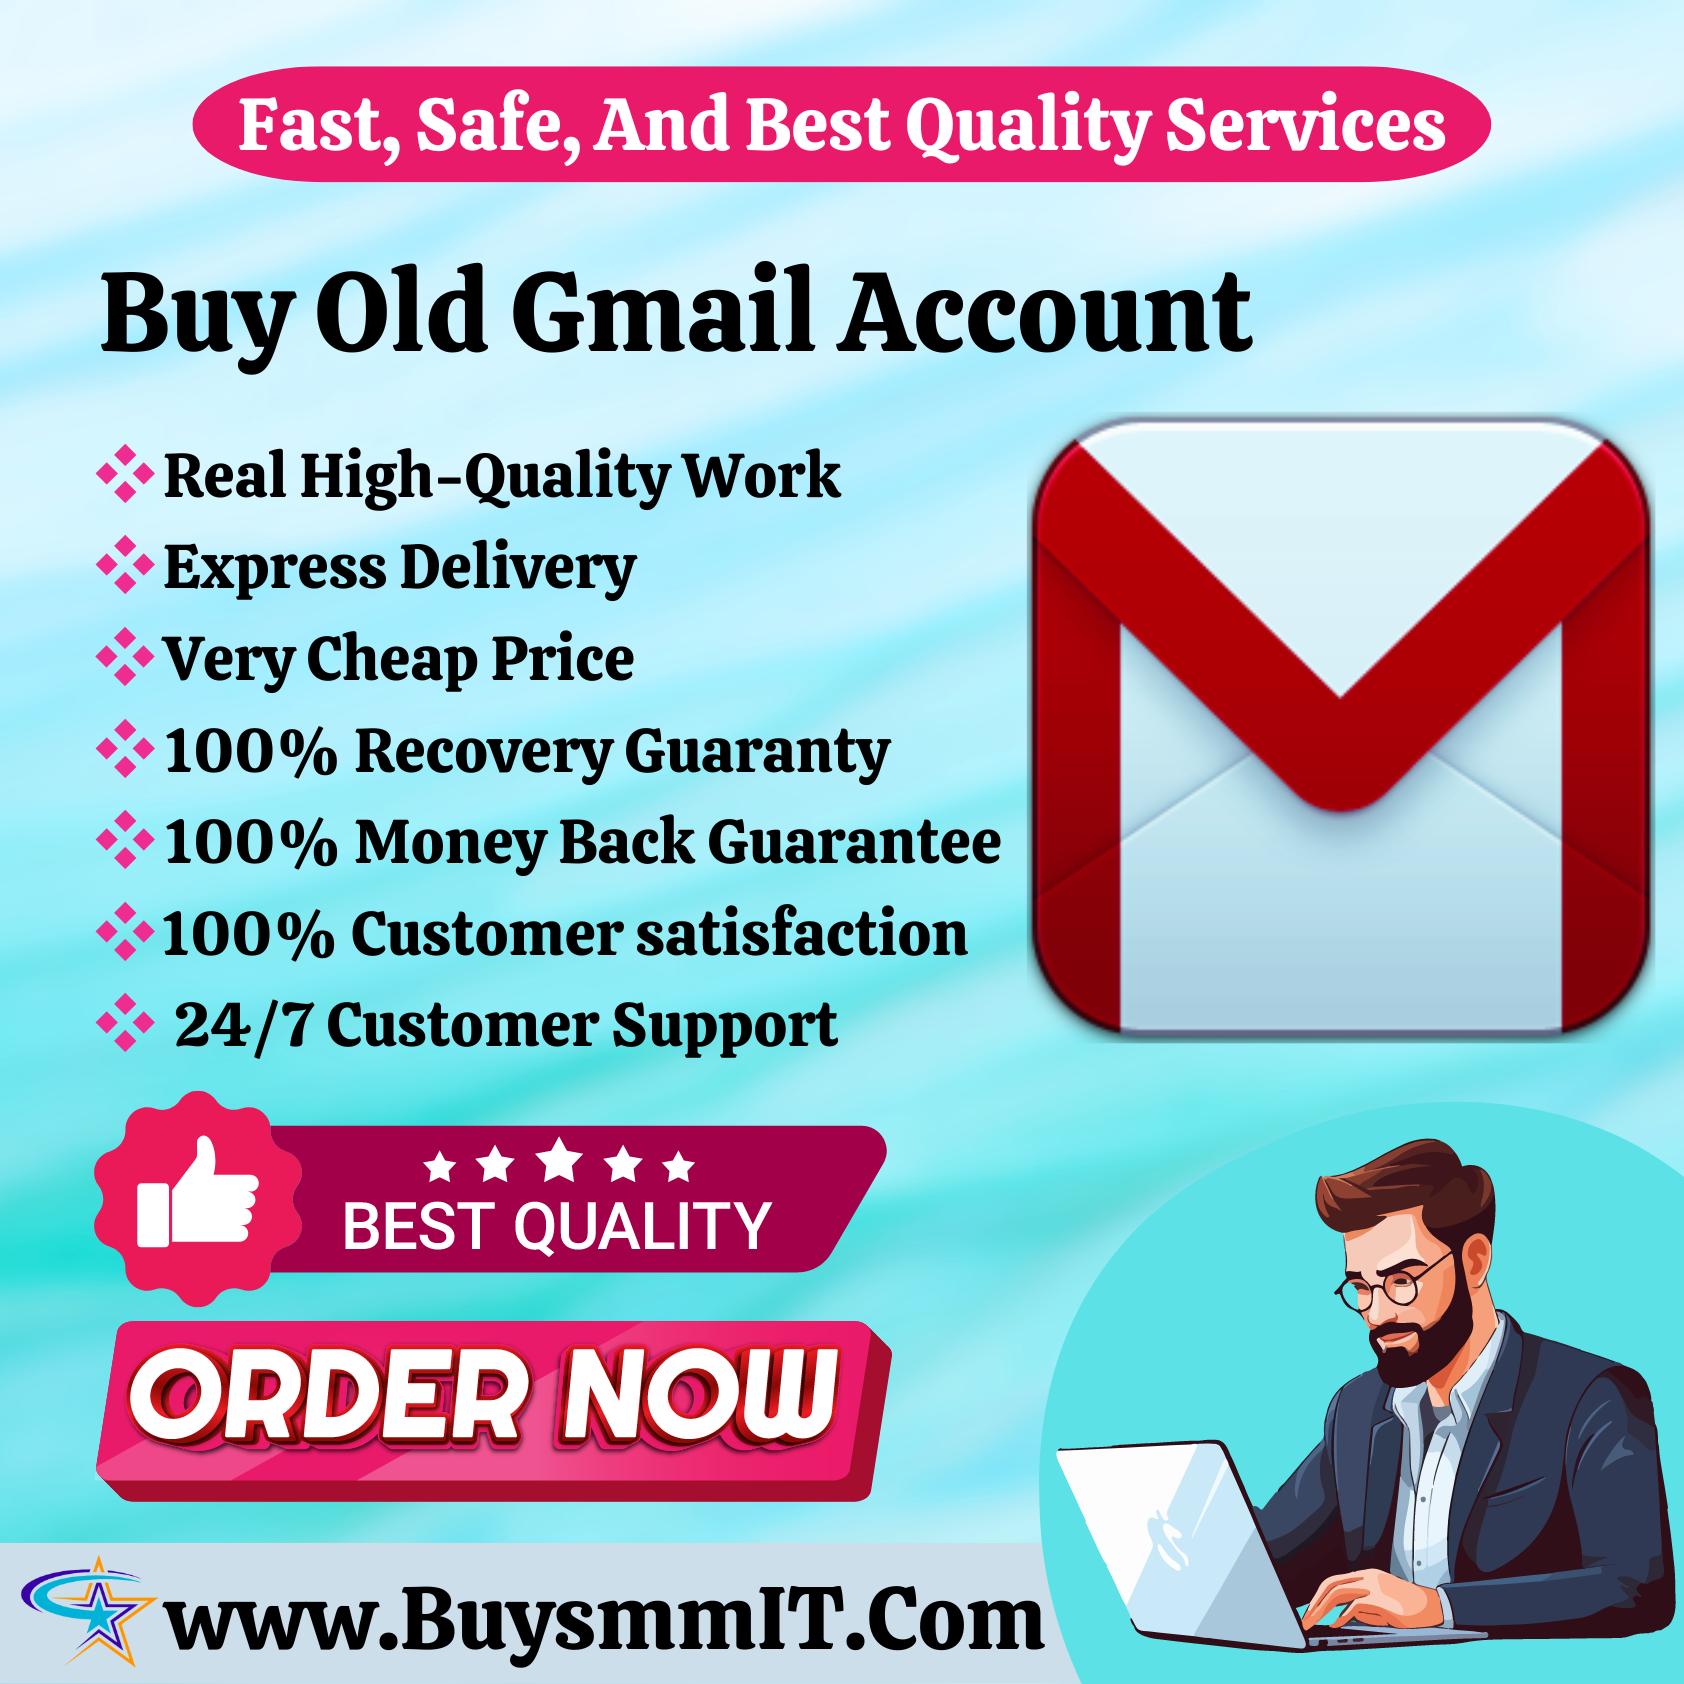 Buy Old Gmail Account - 100% Aged Accounts For Sale